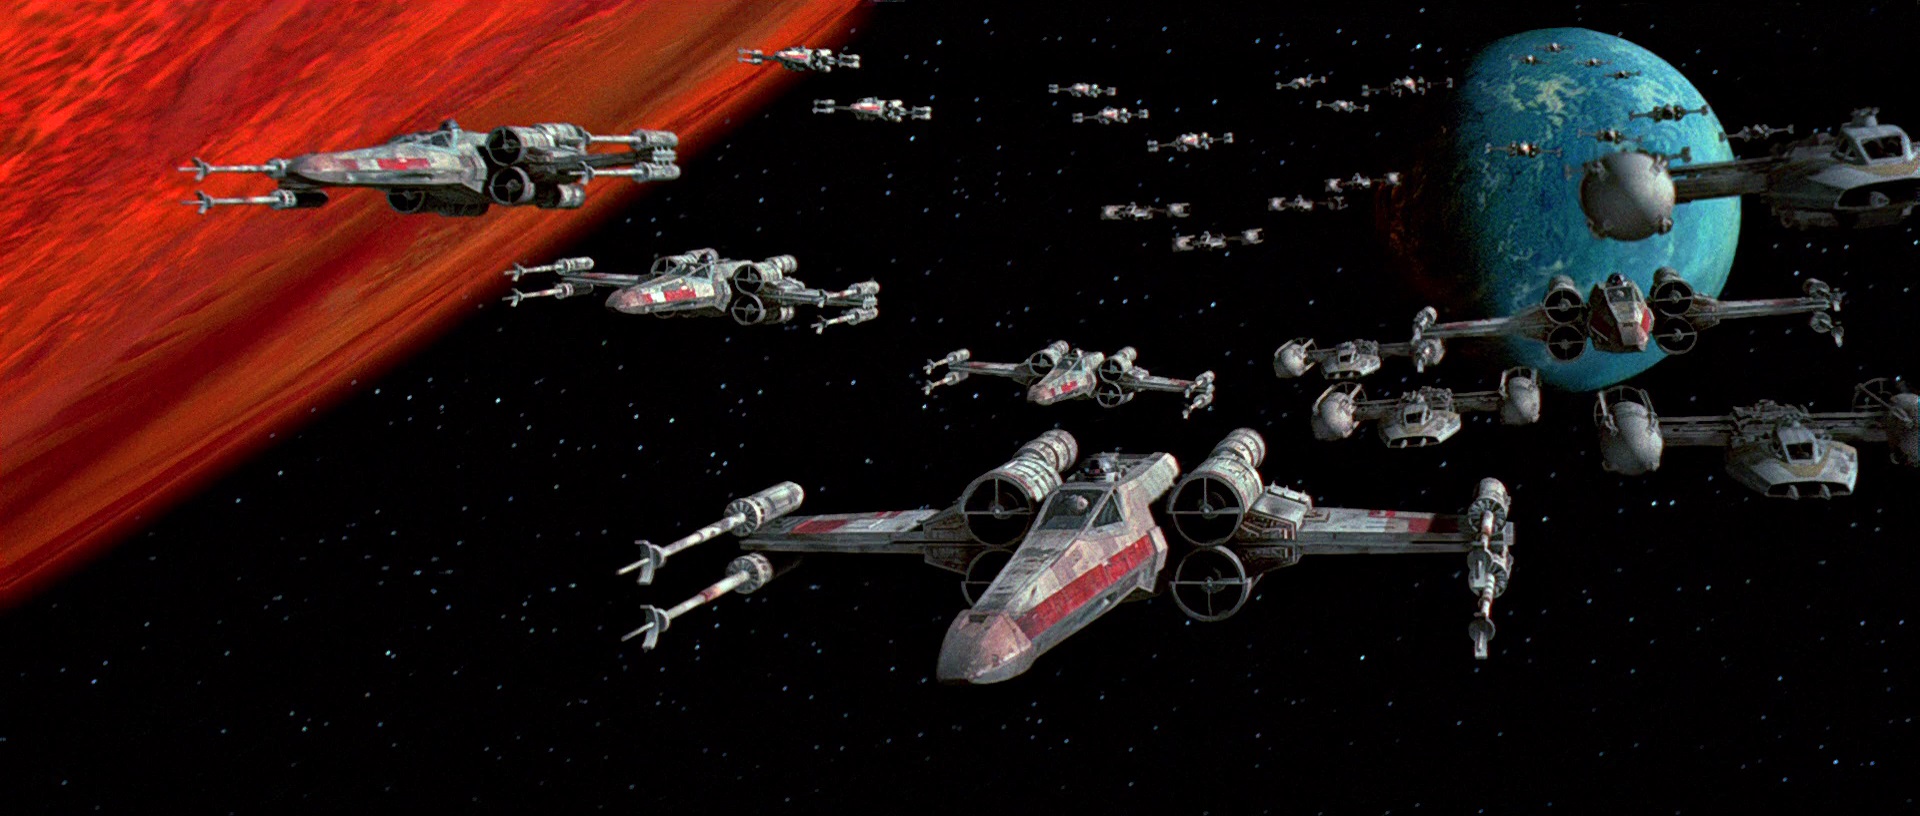 The X-wing squadron departs Yavin in Star Wars (1977) 